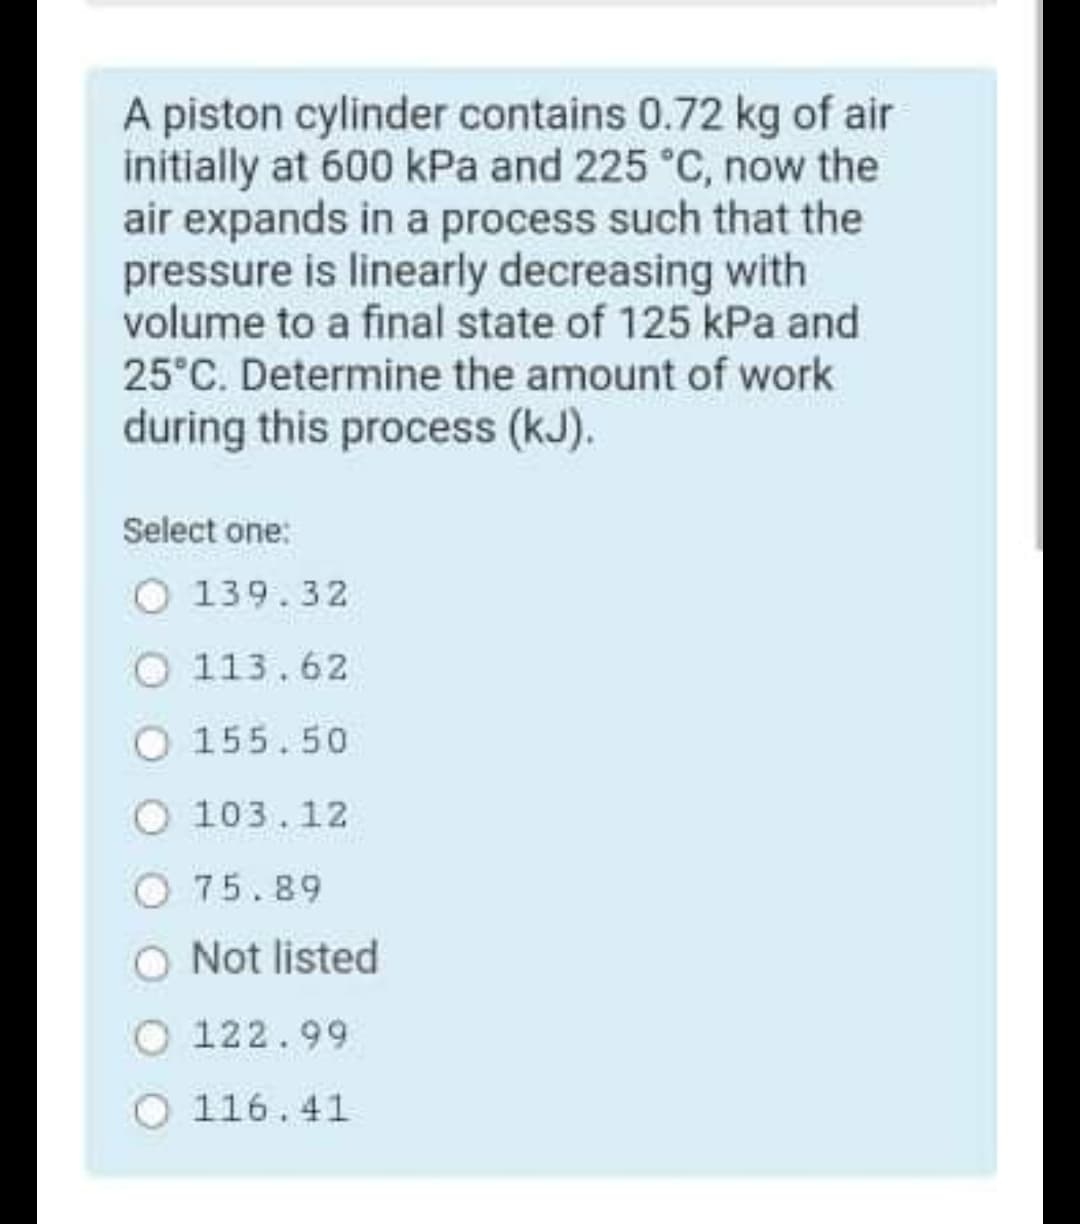 A piston cylinder contains 0.72 kg of air
initially at 600 kPa and 225 °C, now the
air expands in a process such that the
pressure is linearly decreasing with
volume to a final state of 125 kPa and
25°C. Determine the amount of work
during this process (kJ).
Select one:
O 139.32
113.62
155.50
O 103.12
75.89
Not listed
O 122.99
116.41
